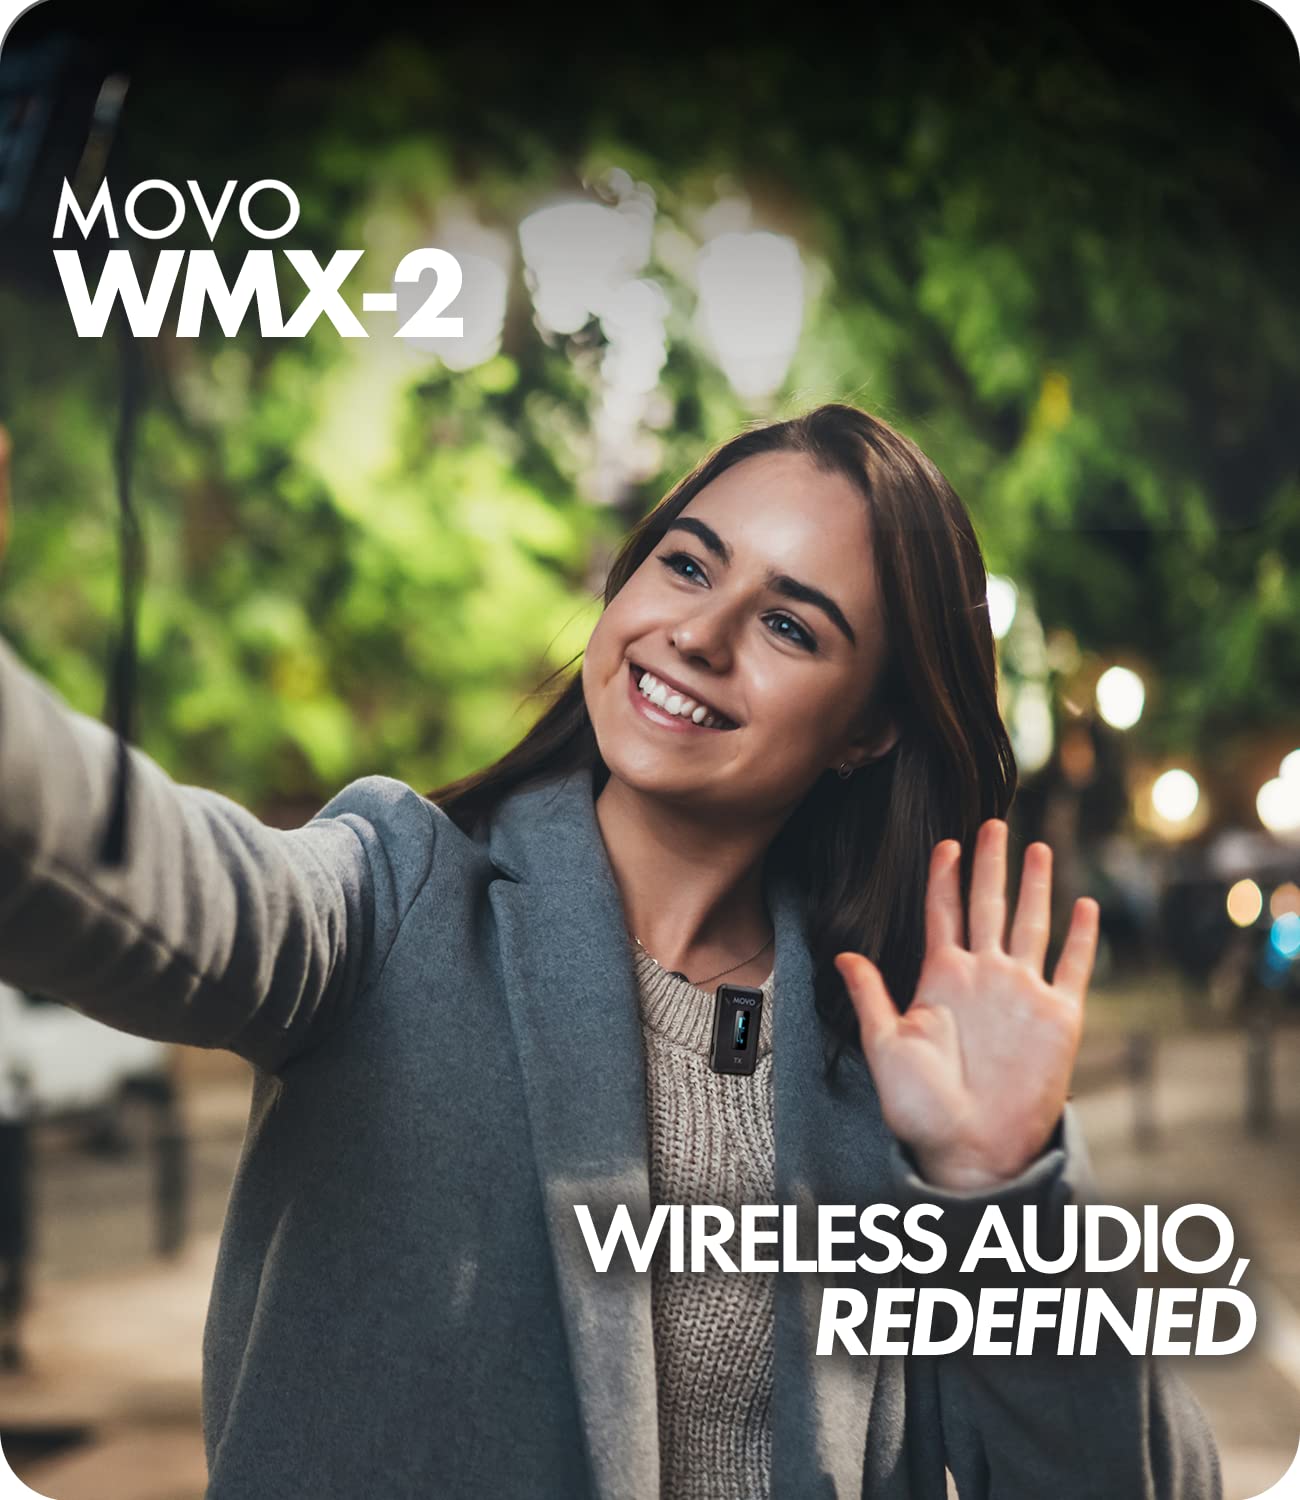 Movo WMX-2 Wireless Camera Microphone with Charging Case - Wireless Lapel Mic - 7HR Battery, 328' Range, Adjustable Gain, & LED Display  - Very Good